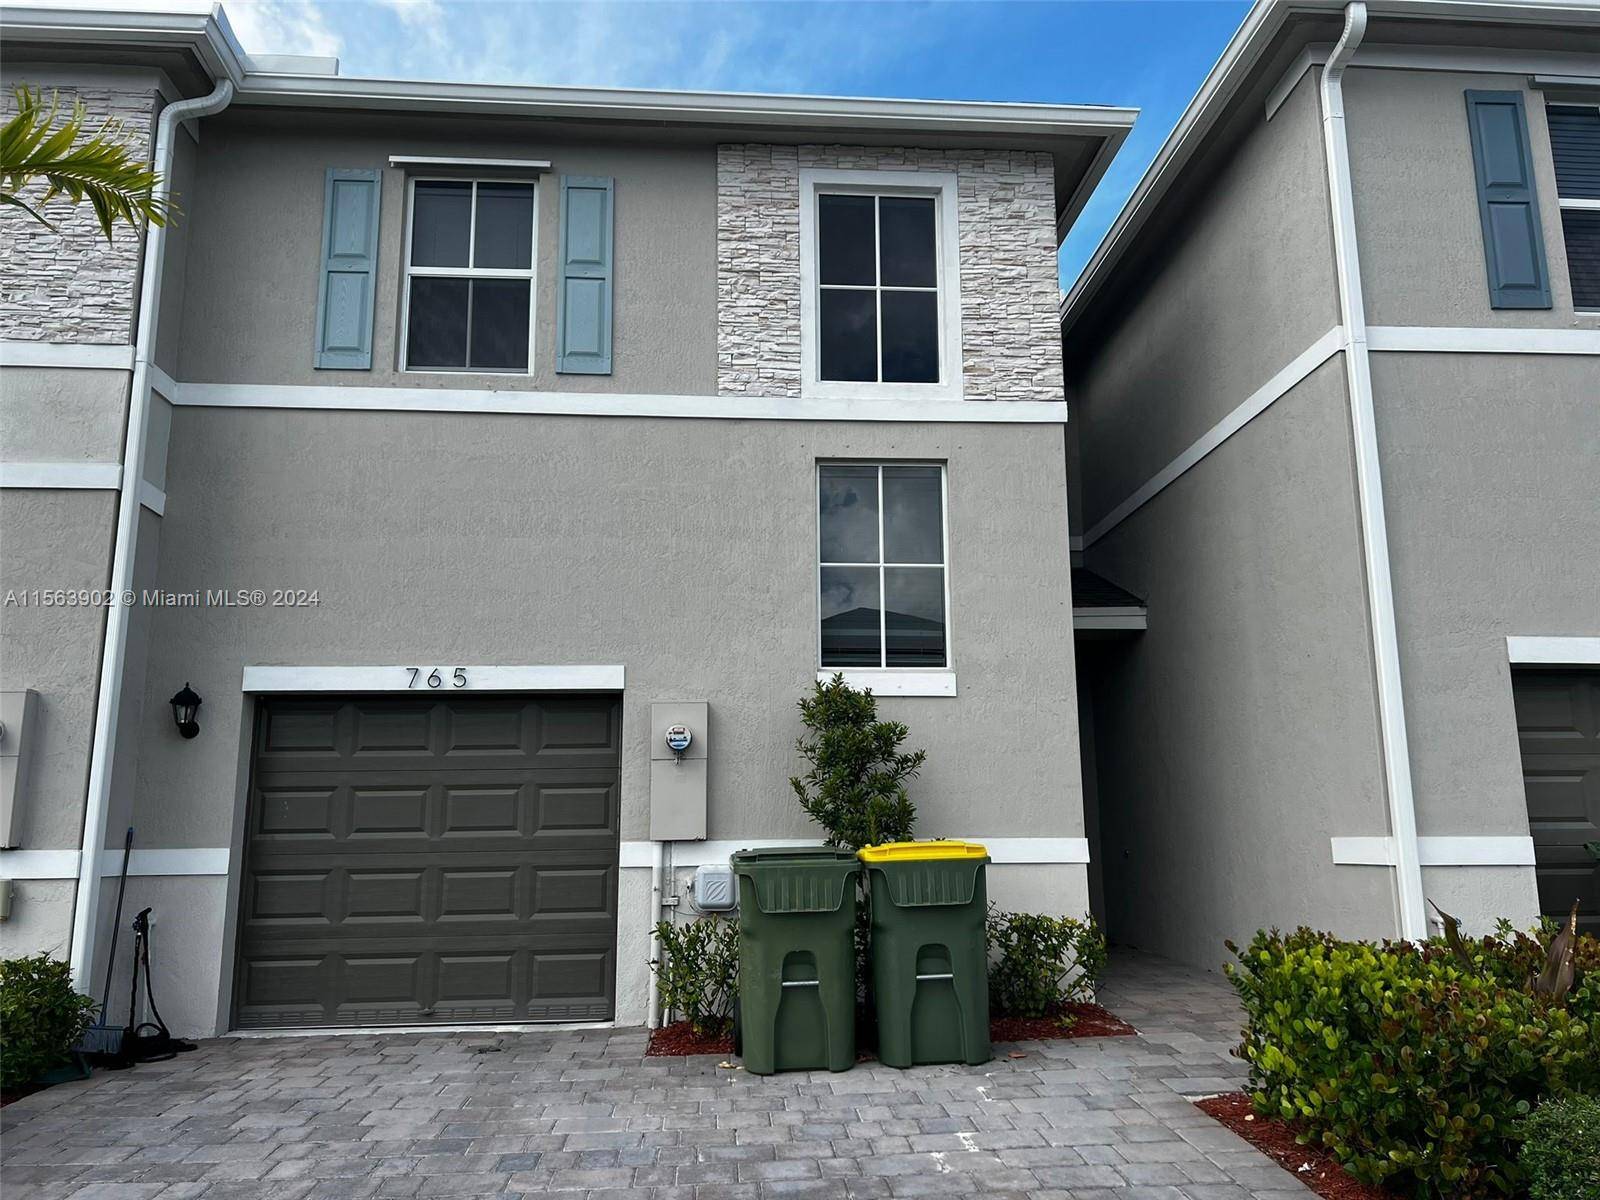 New and modern townhome in Homestead.